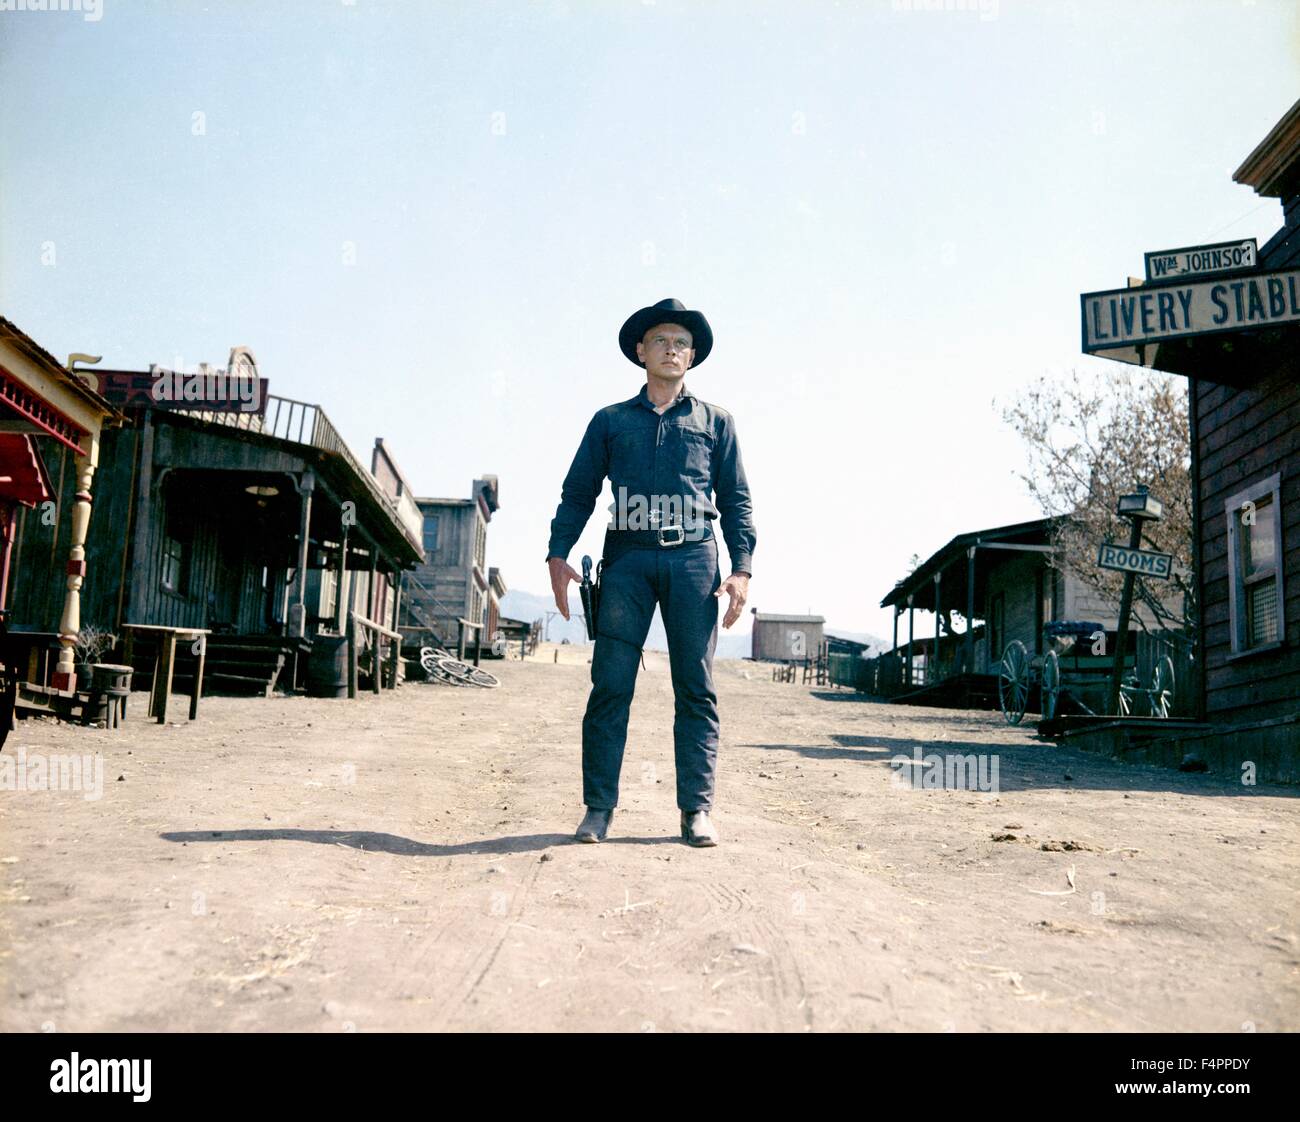 Yul Brynner / The Magnificent Seven / 1960 directed by John Sturges [United Artists] Stock Photo